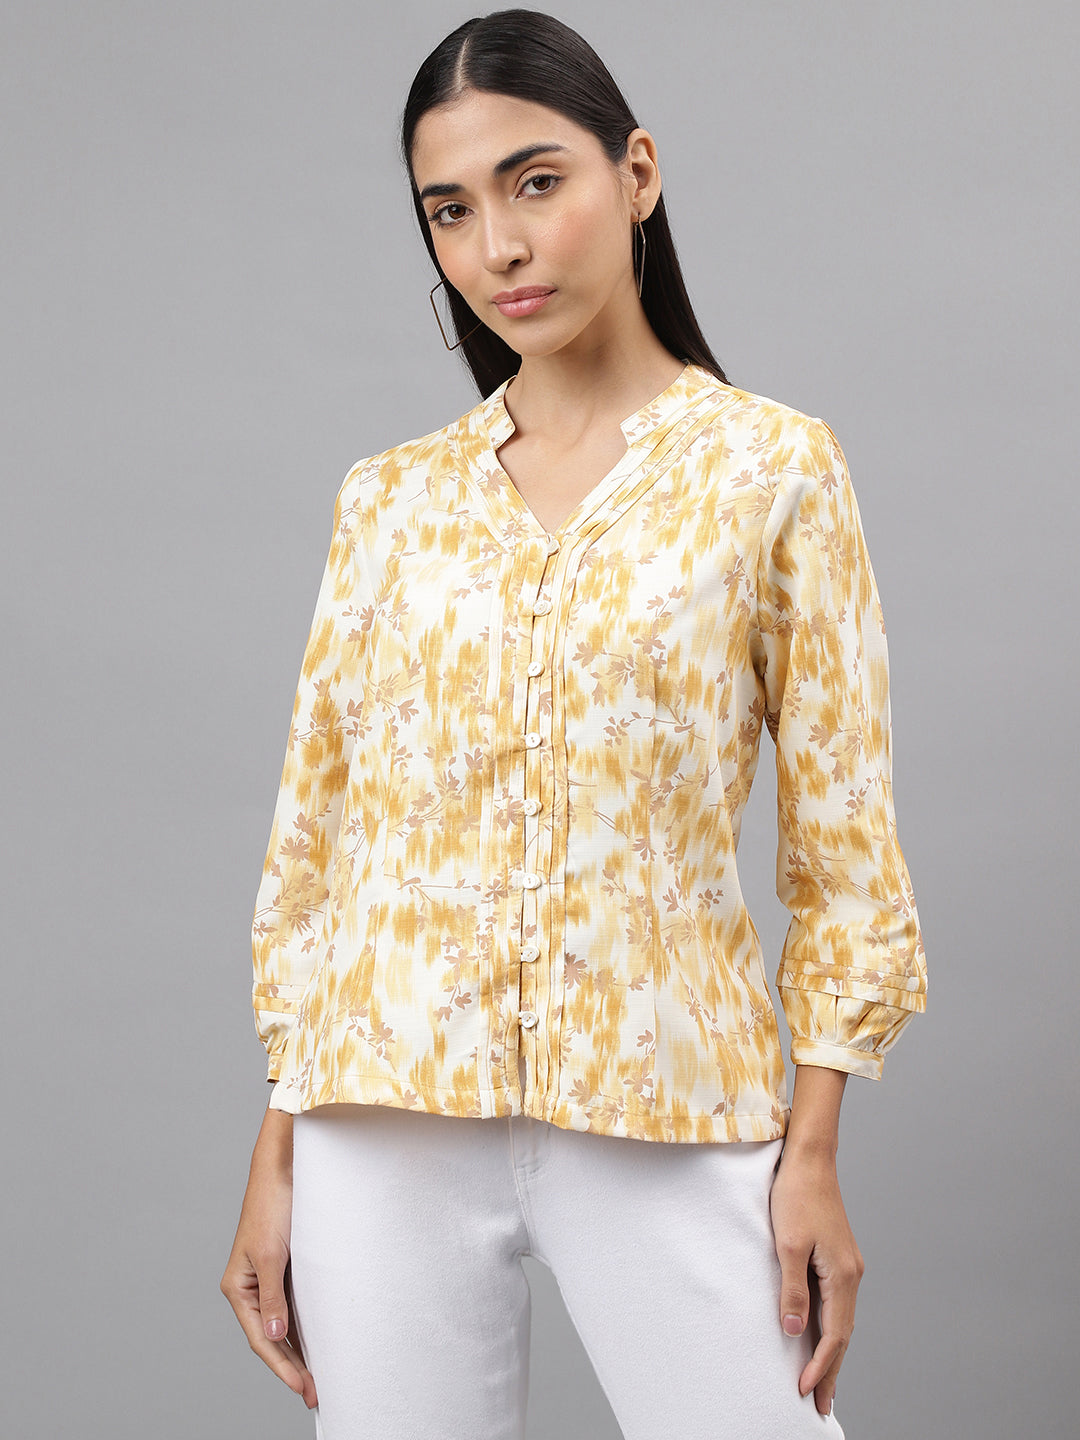 Yellow Full Sleeve V-Neck Floral Print Blouse Top